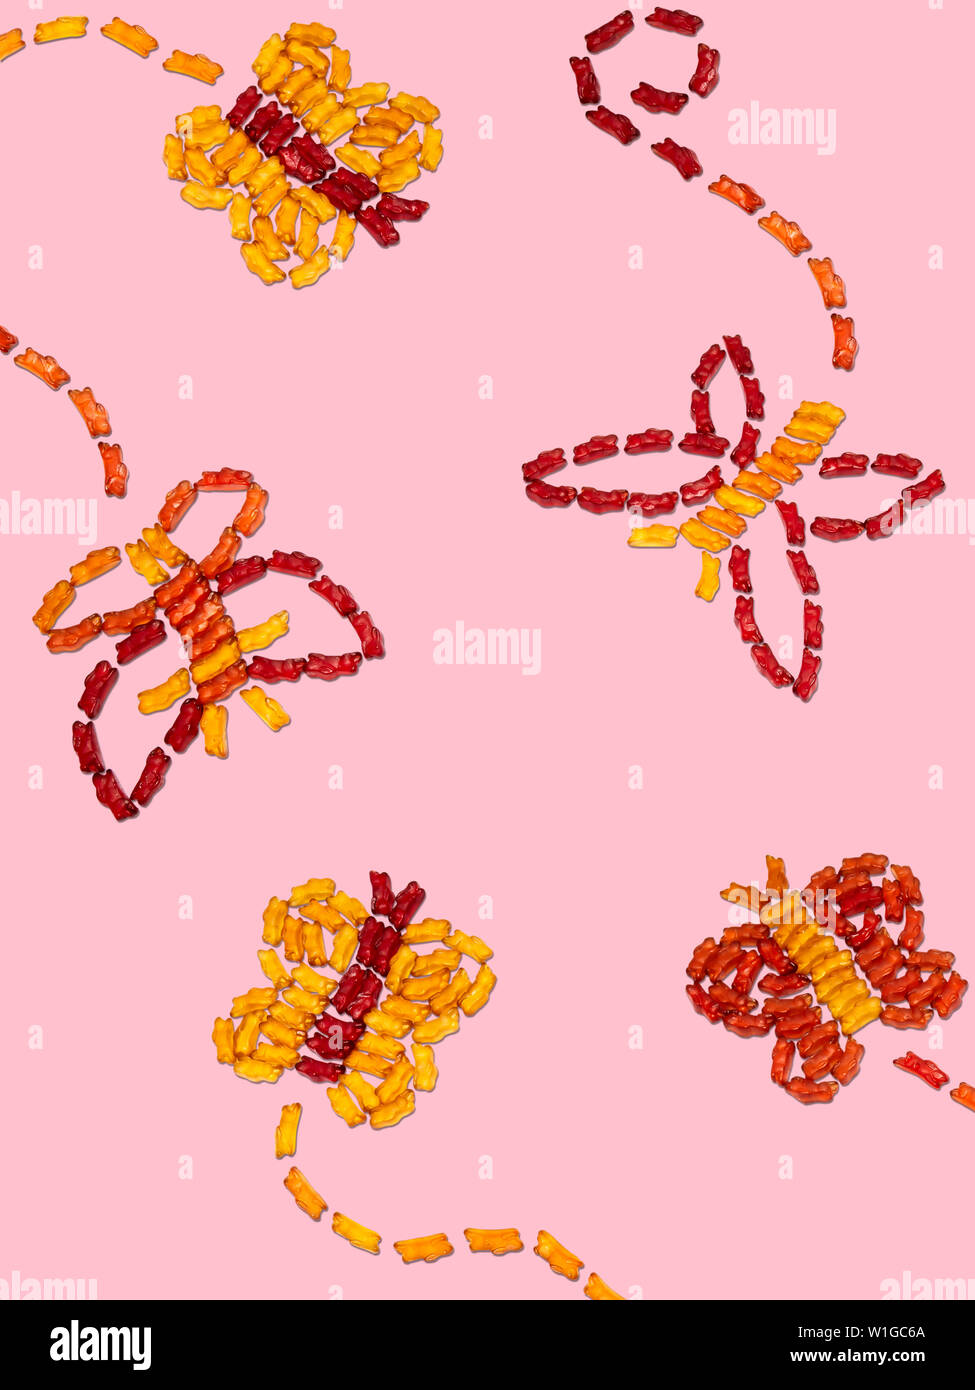 Butterflies made out of fruit snacks Stock Photo